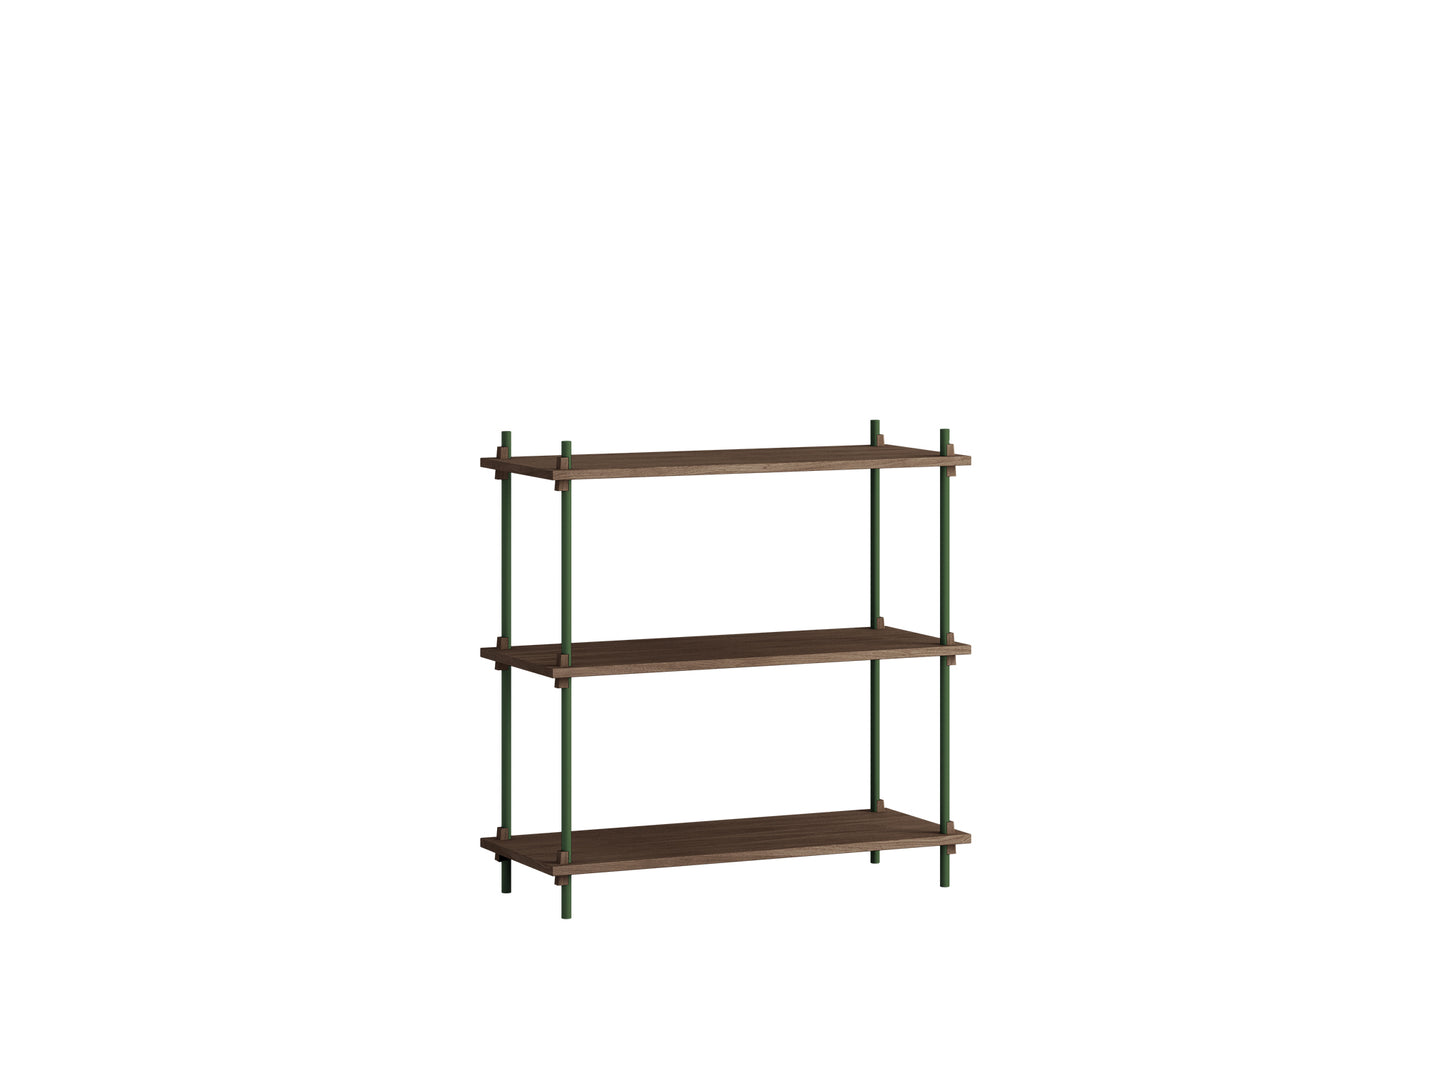 Moebe Shelving System - S.85.1.A Set in Pine Green / Smoked Oak